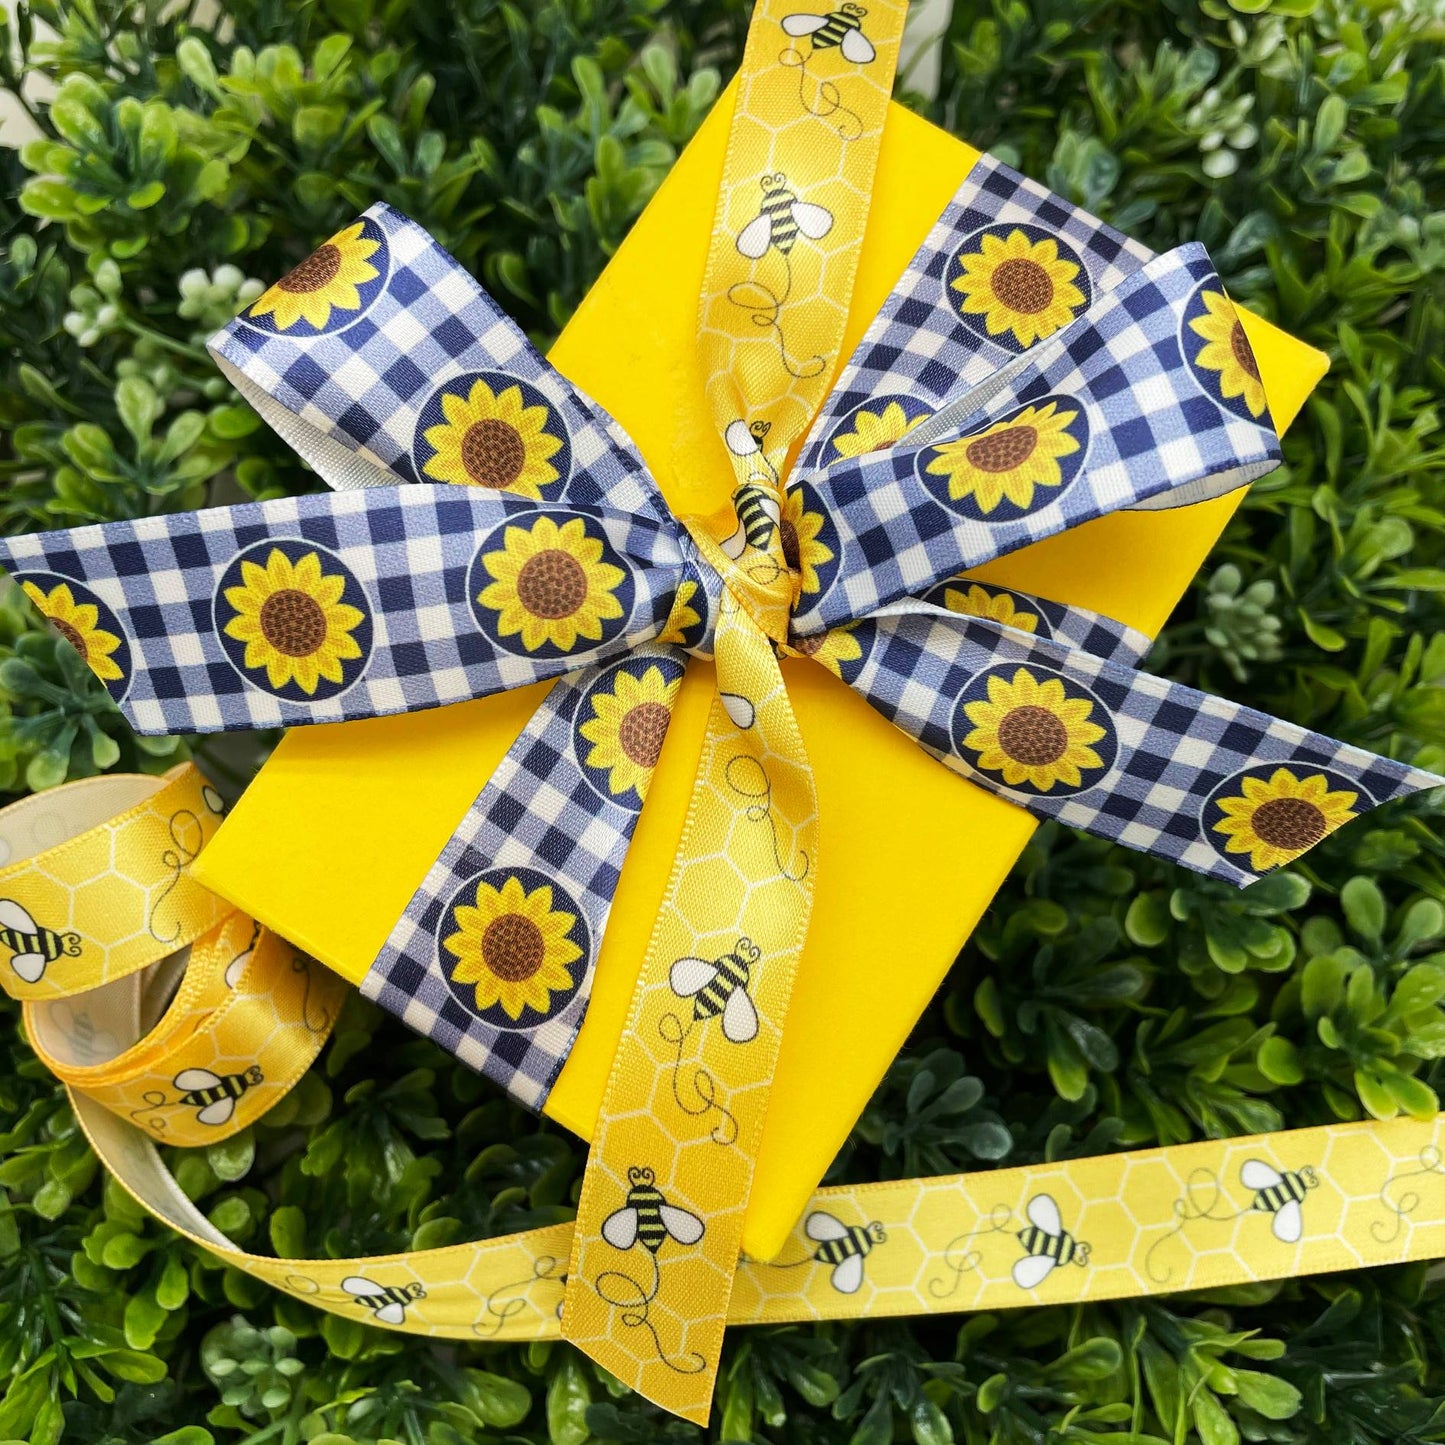 Buzzing Bees Ribbon with a yellow comb background on 5/8" White Single Face Satin